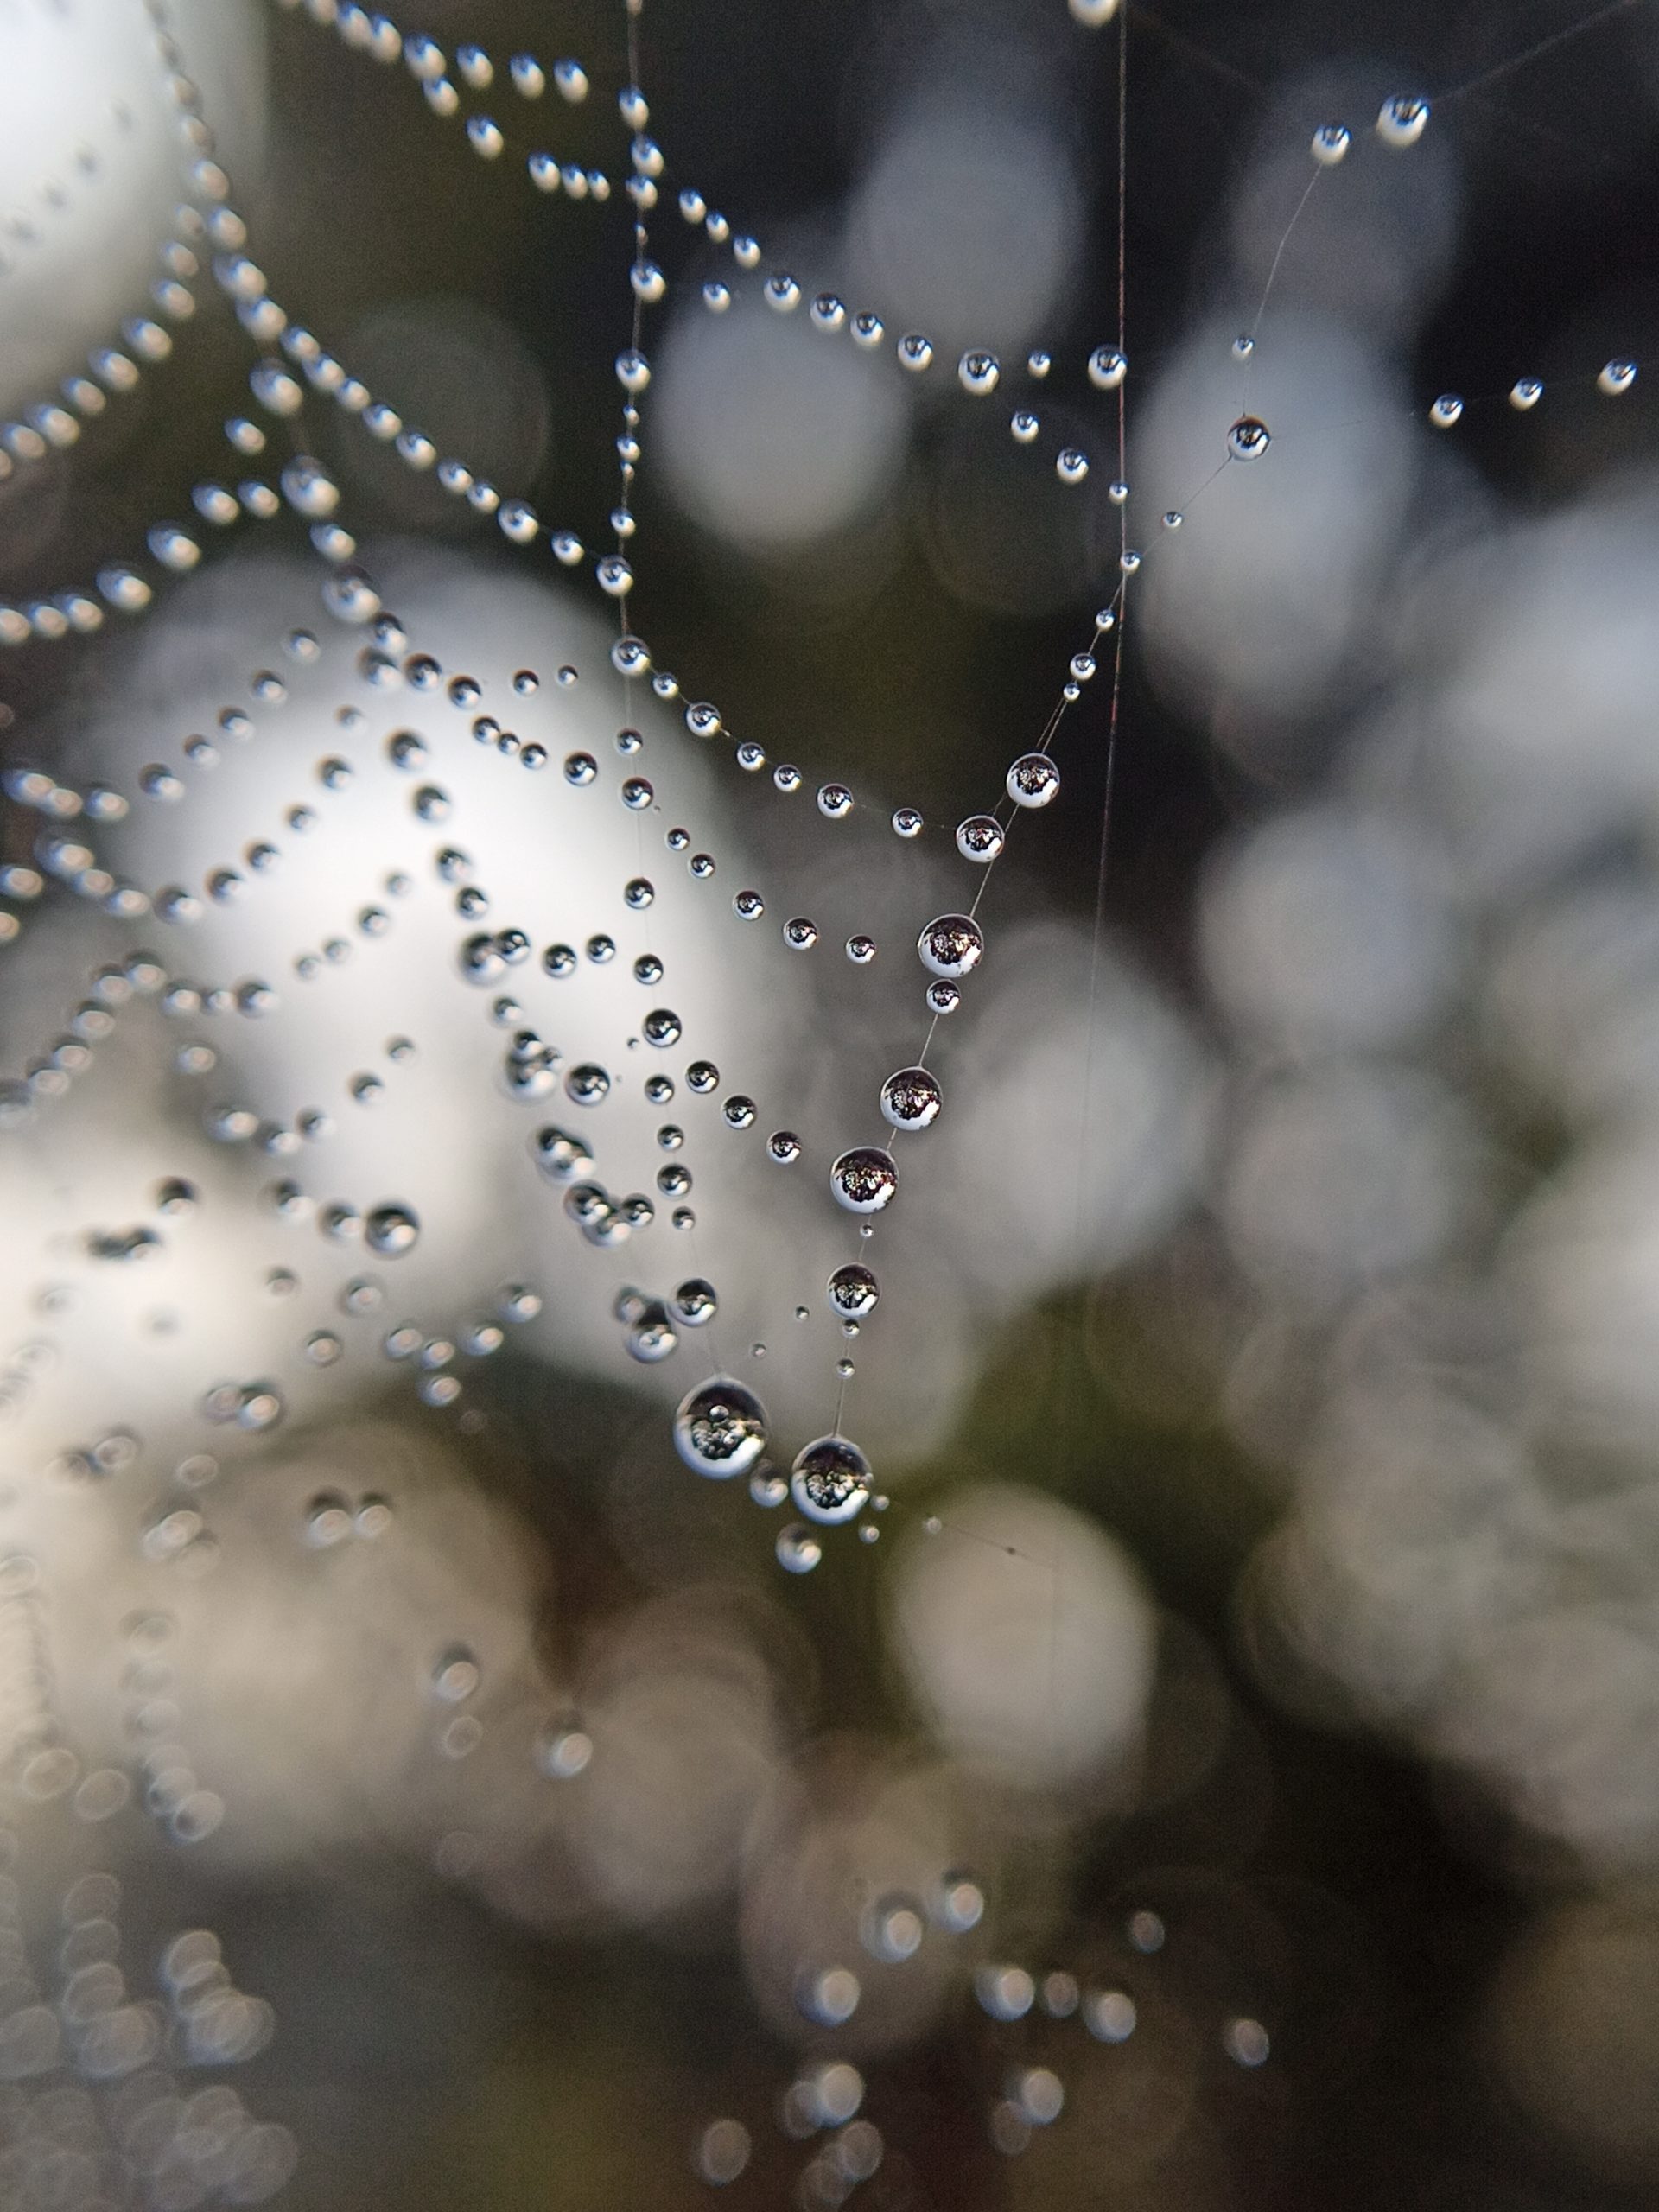 Drops on spider web